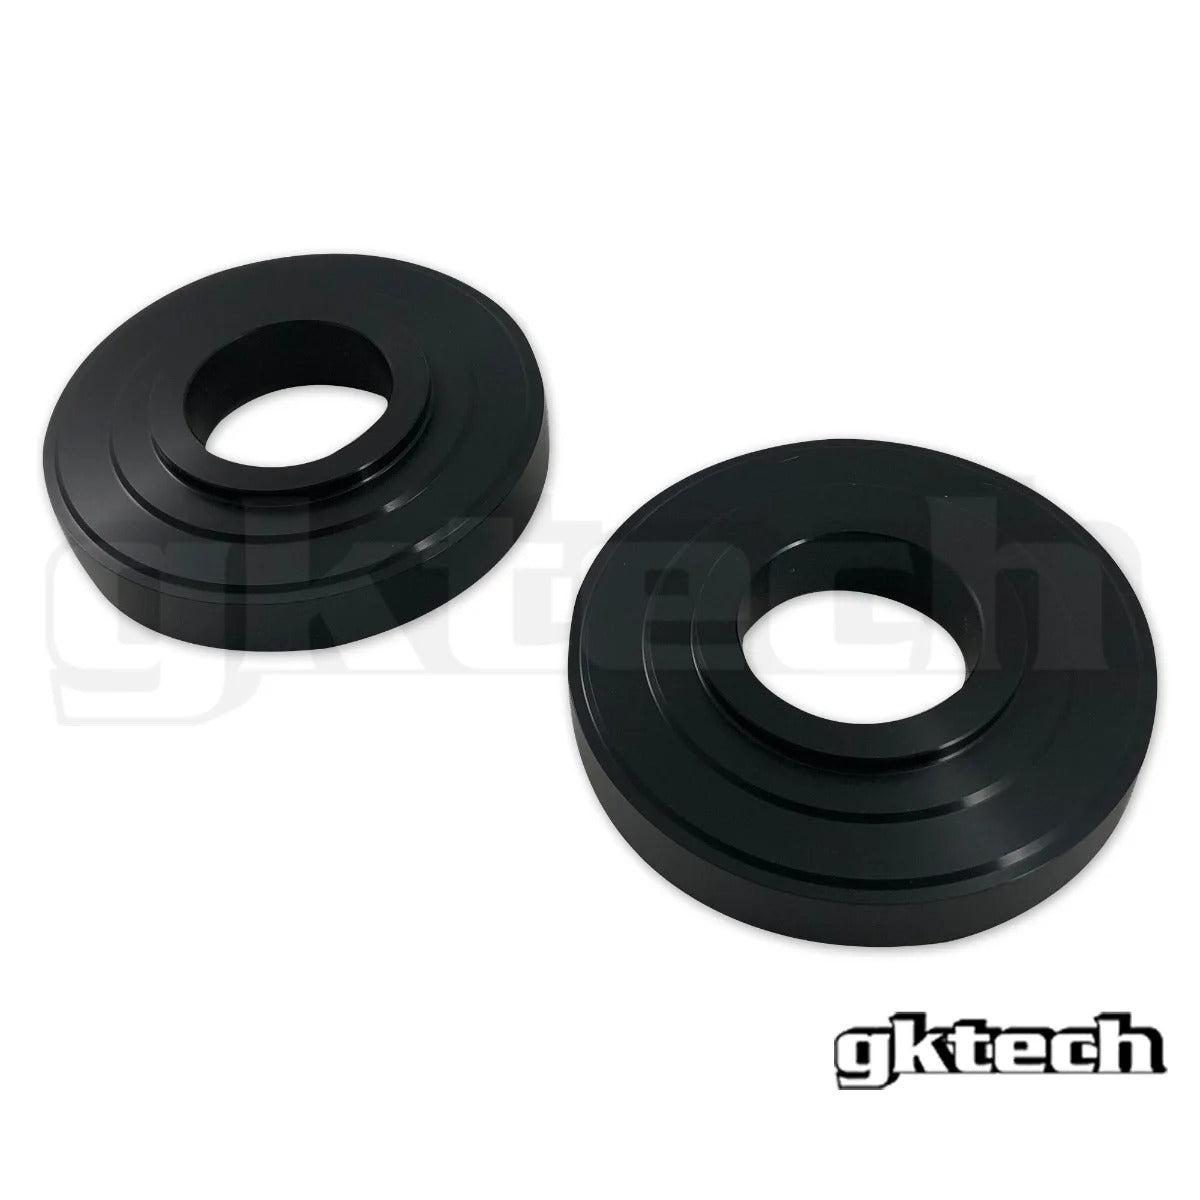 V2 Axle Spacers (5mm 10mm or 15mm) - Pair